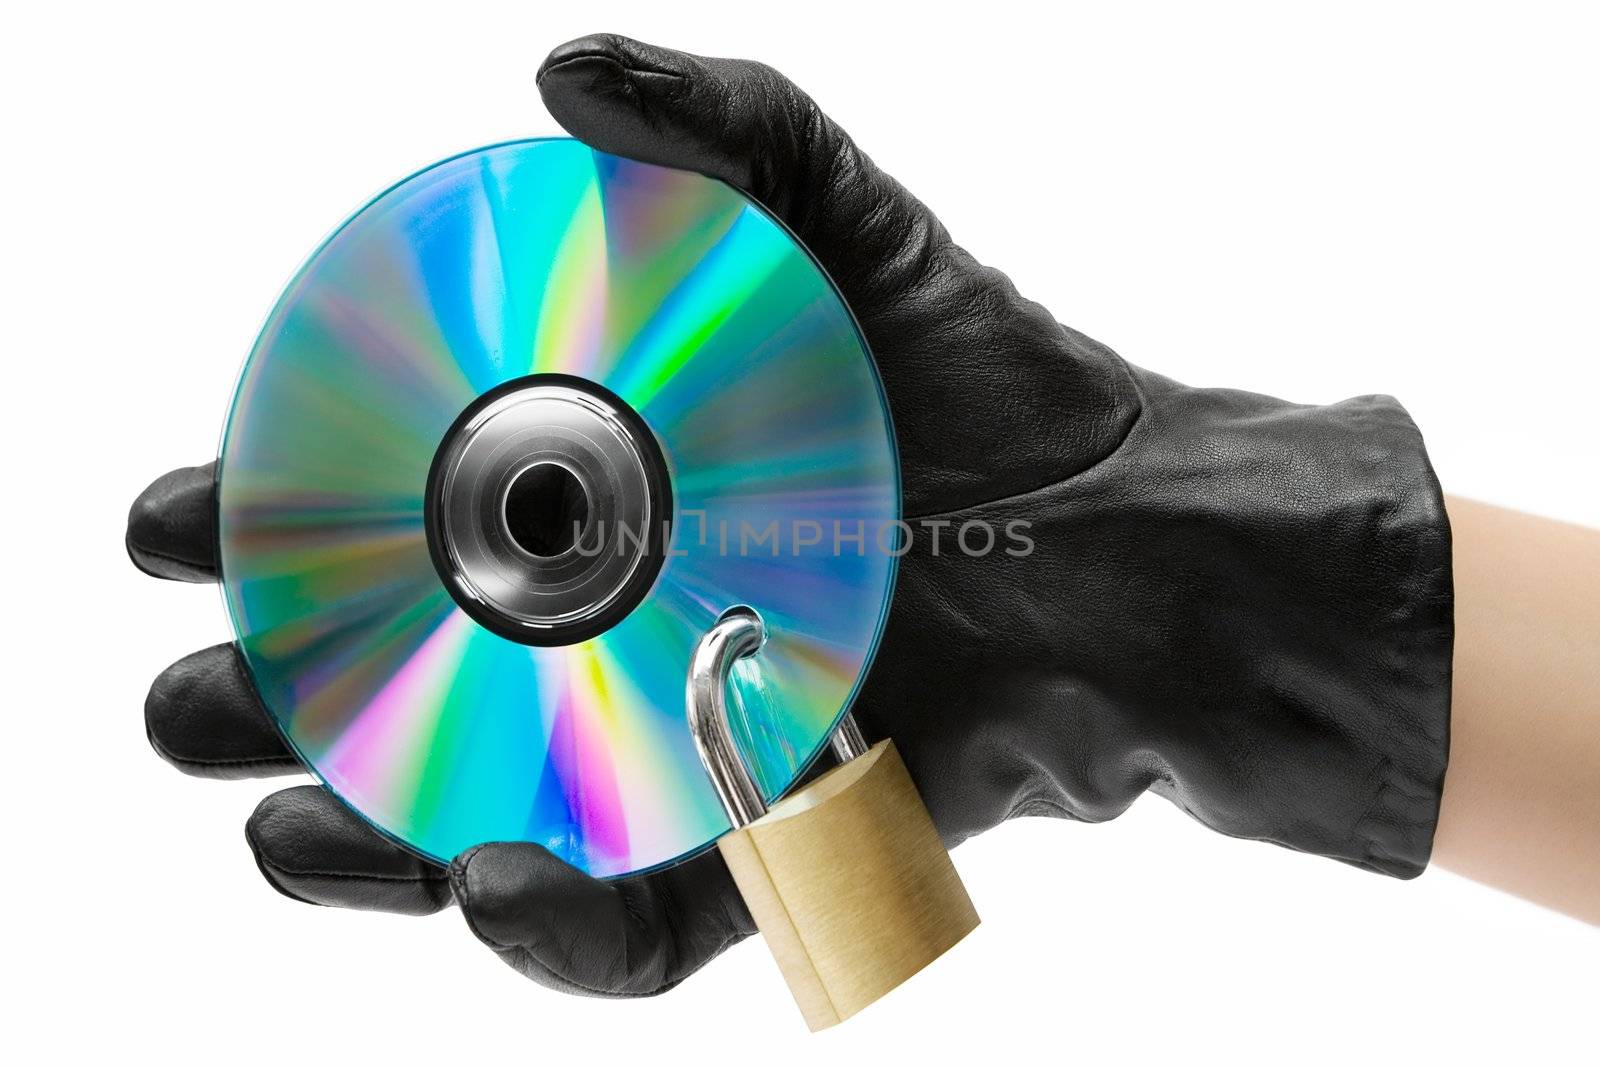 Gloved hand stealing data. Isolated on a white background.